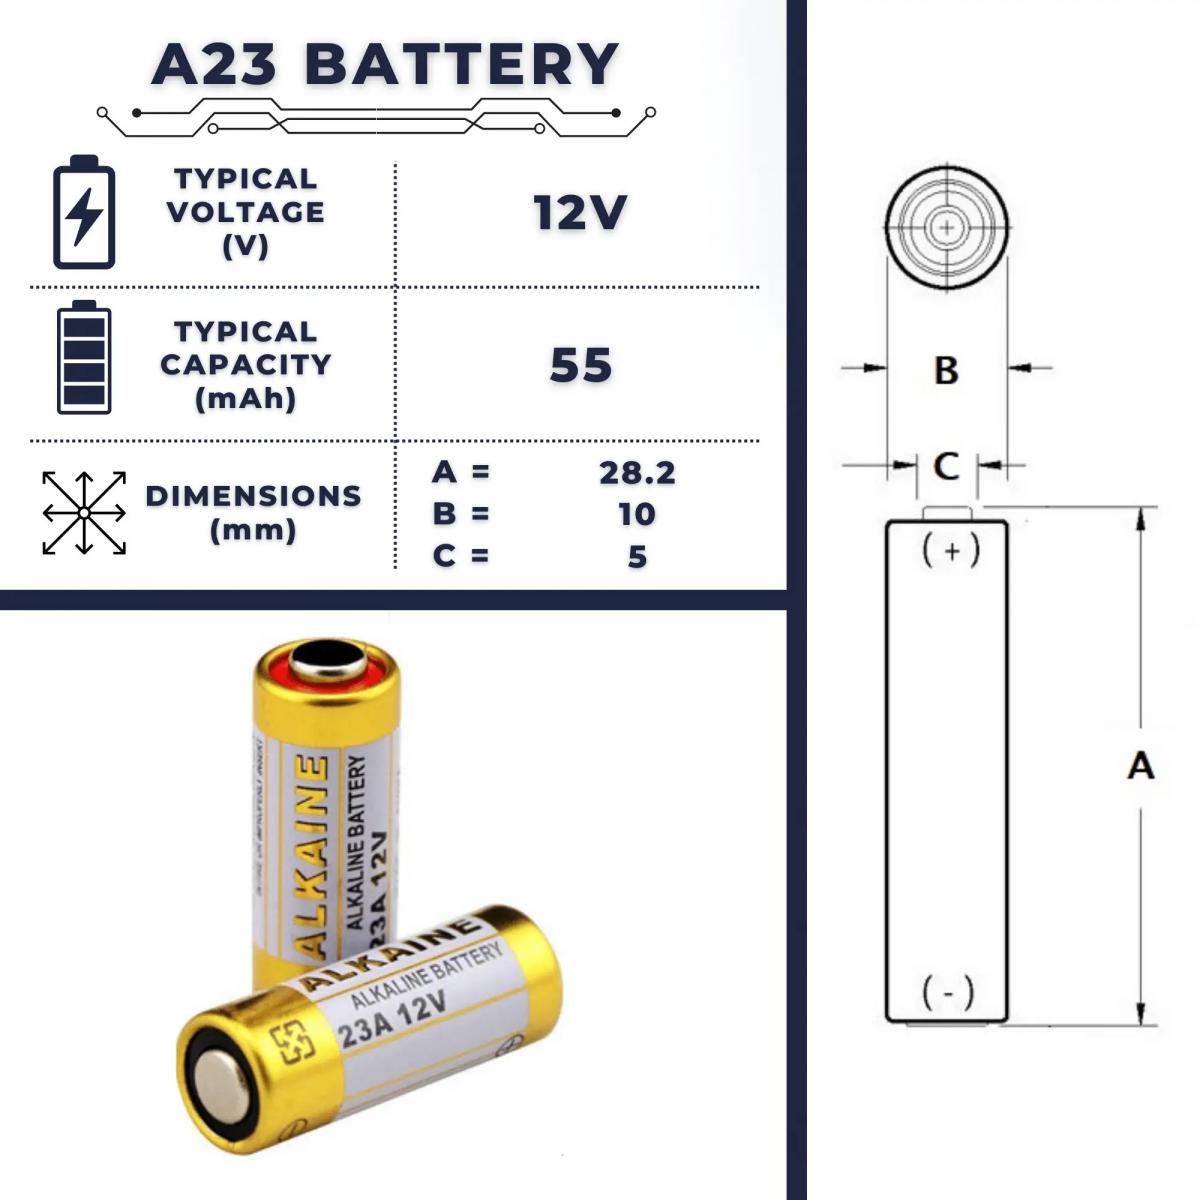 A23 battery: Equivalent, Specifications and Replacements